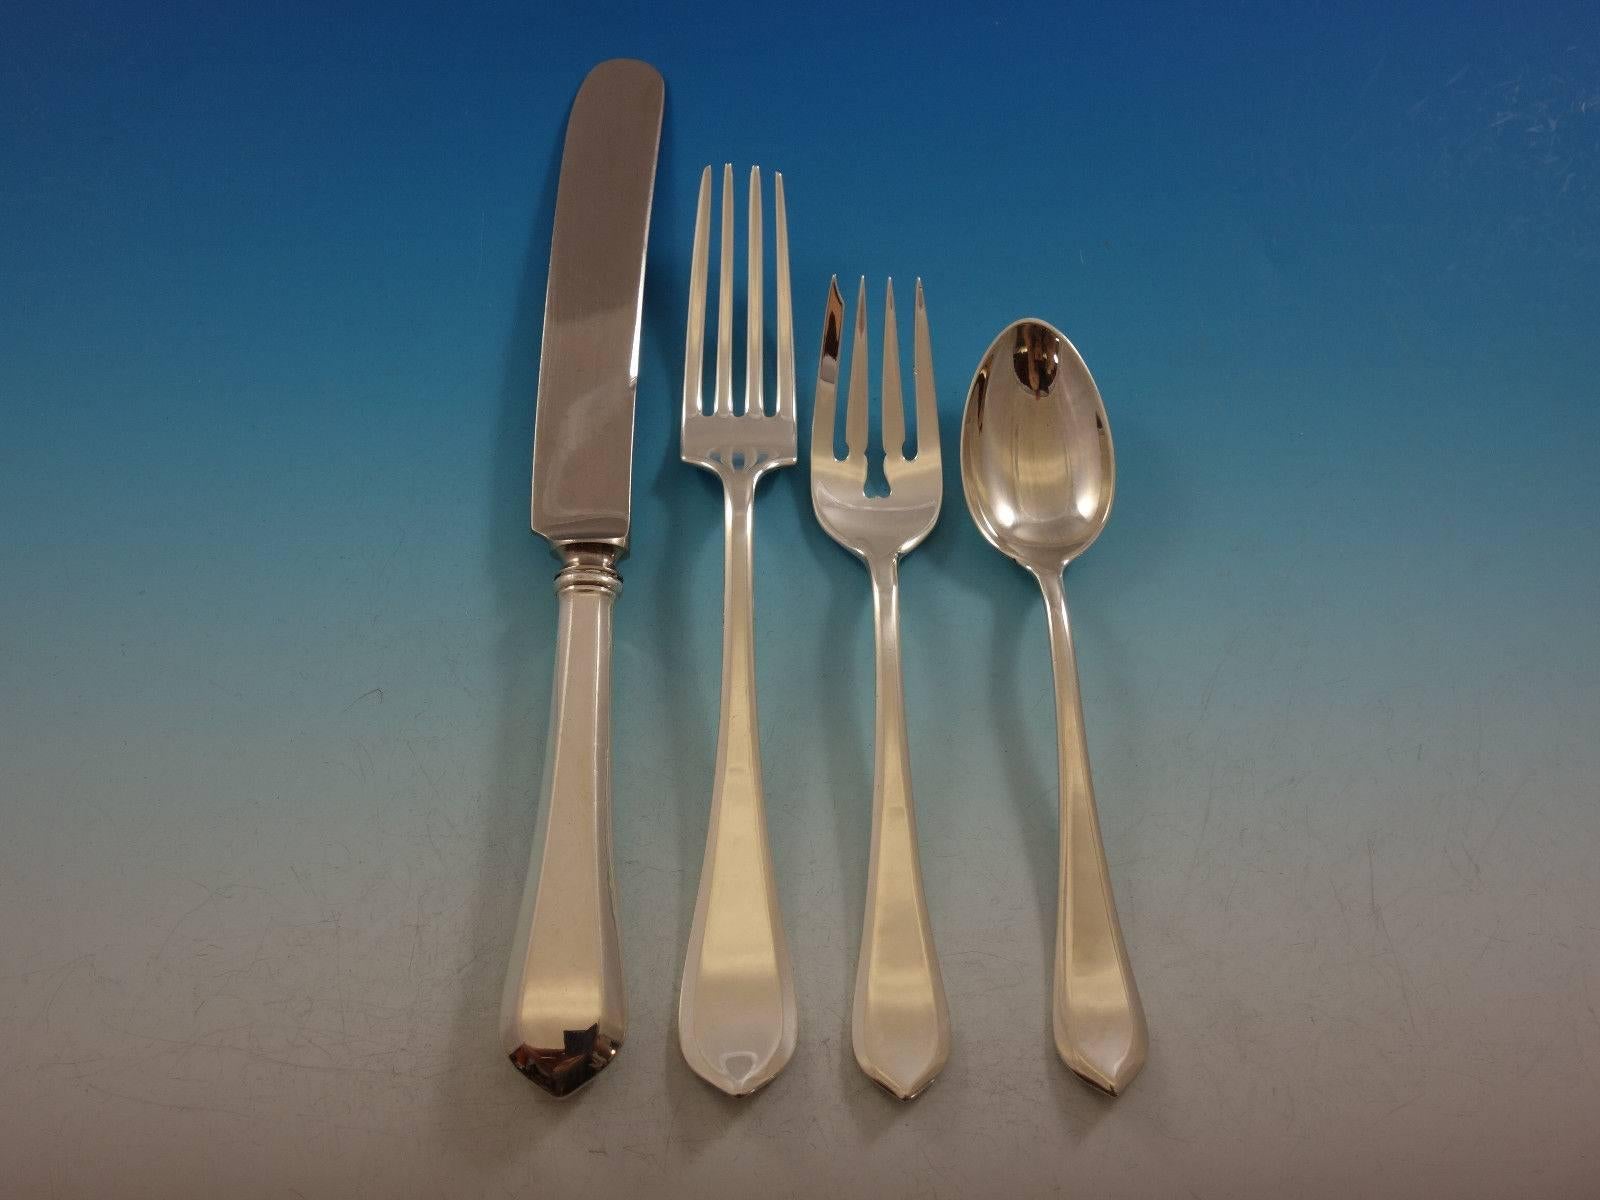 Old London Plain by Gorham sterling silver flatware set, 125 pieces. This set is simple and timeless and includes: 

12 knives, 8 1/2